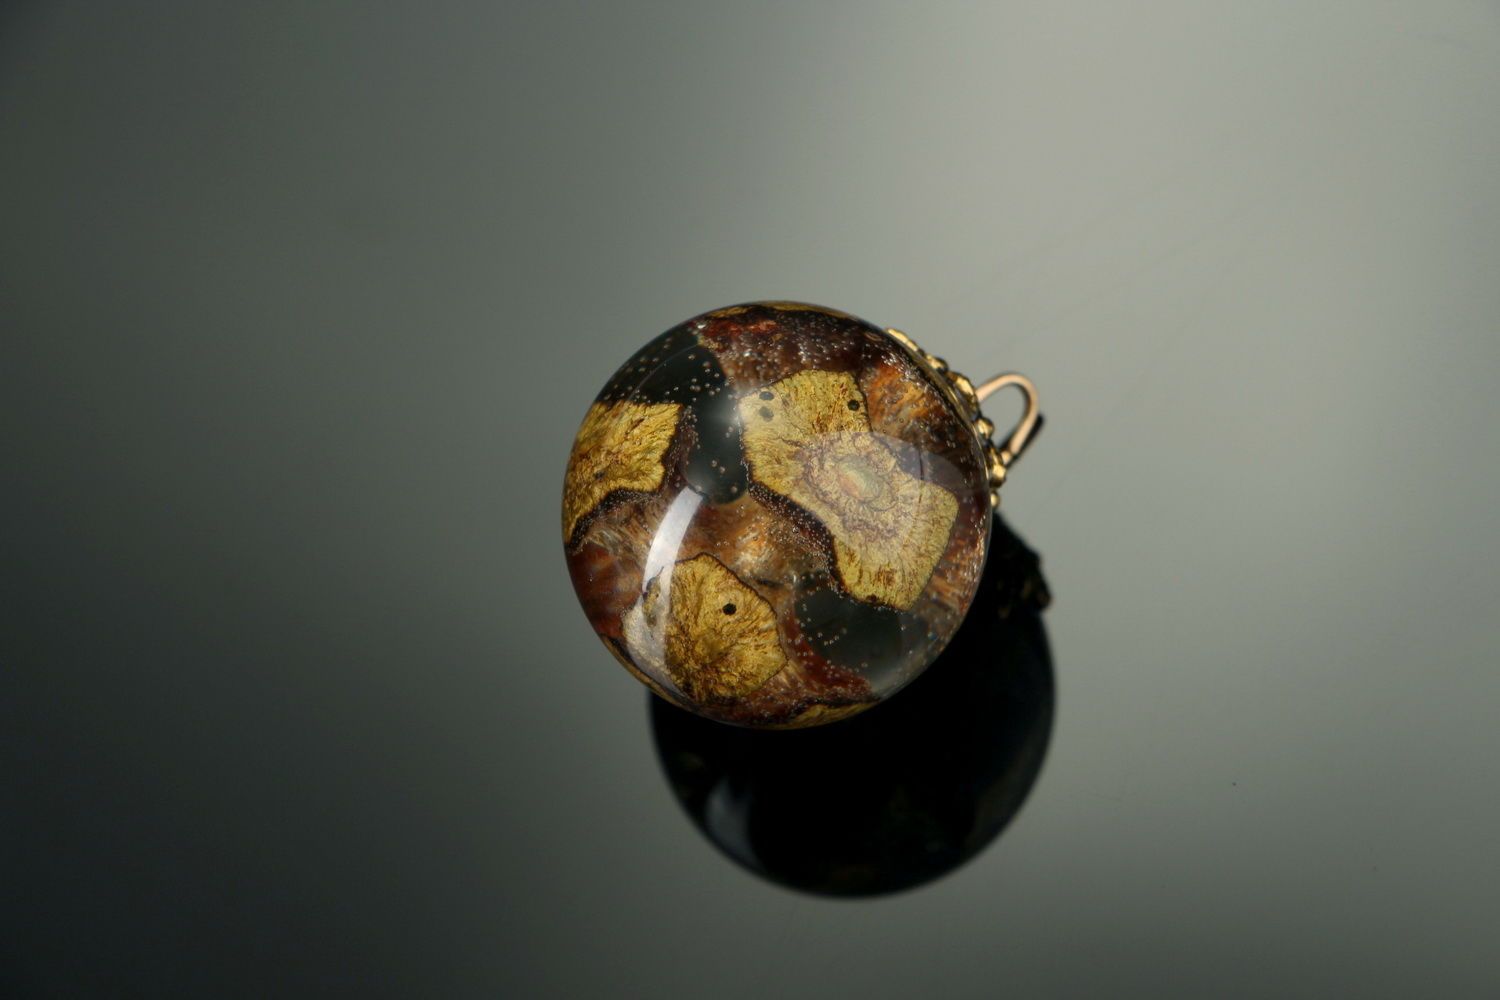 Pendant made of fir cone embedded in epoxy photo 1